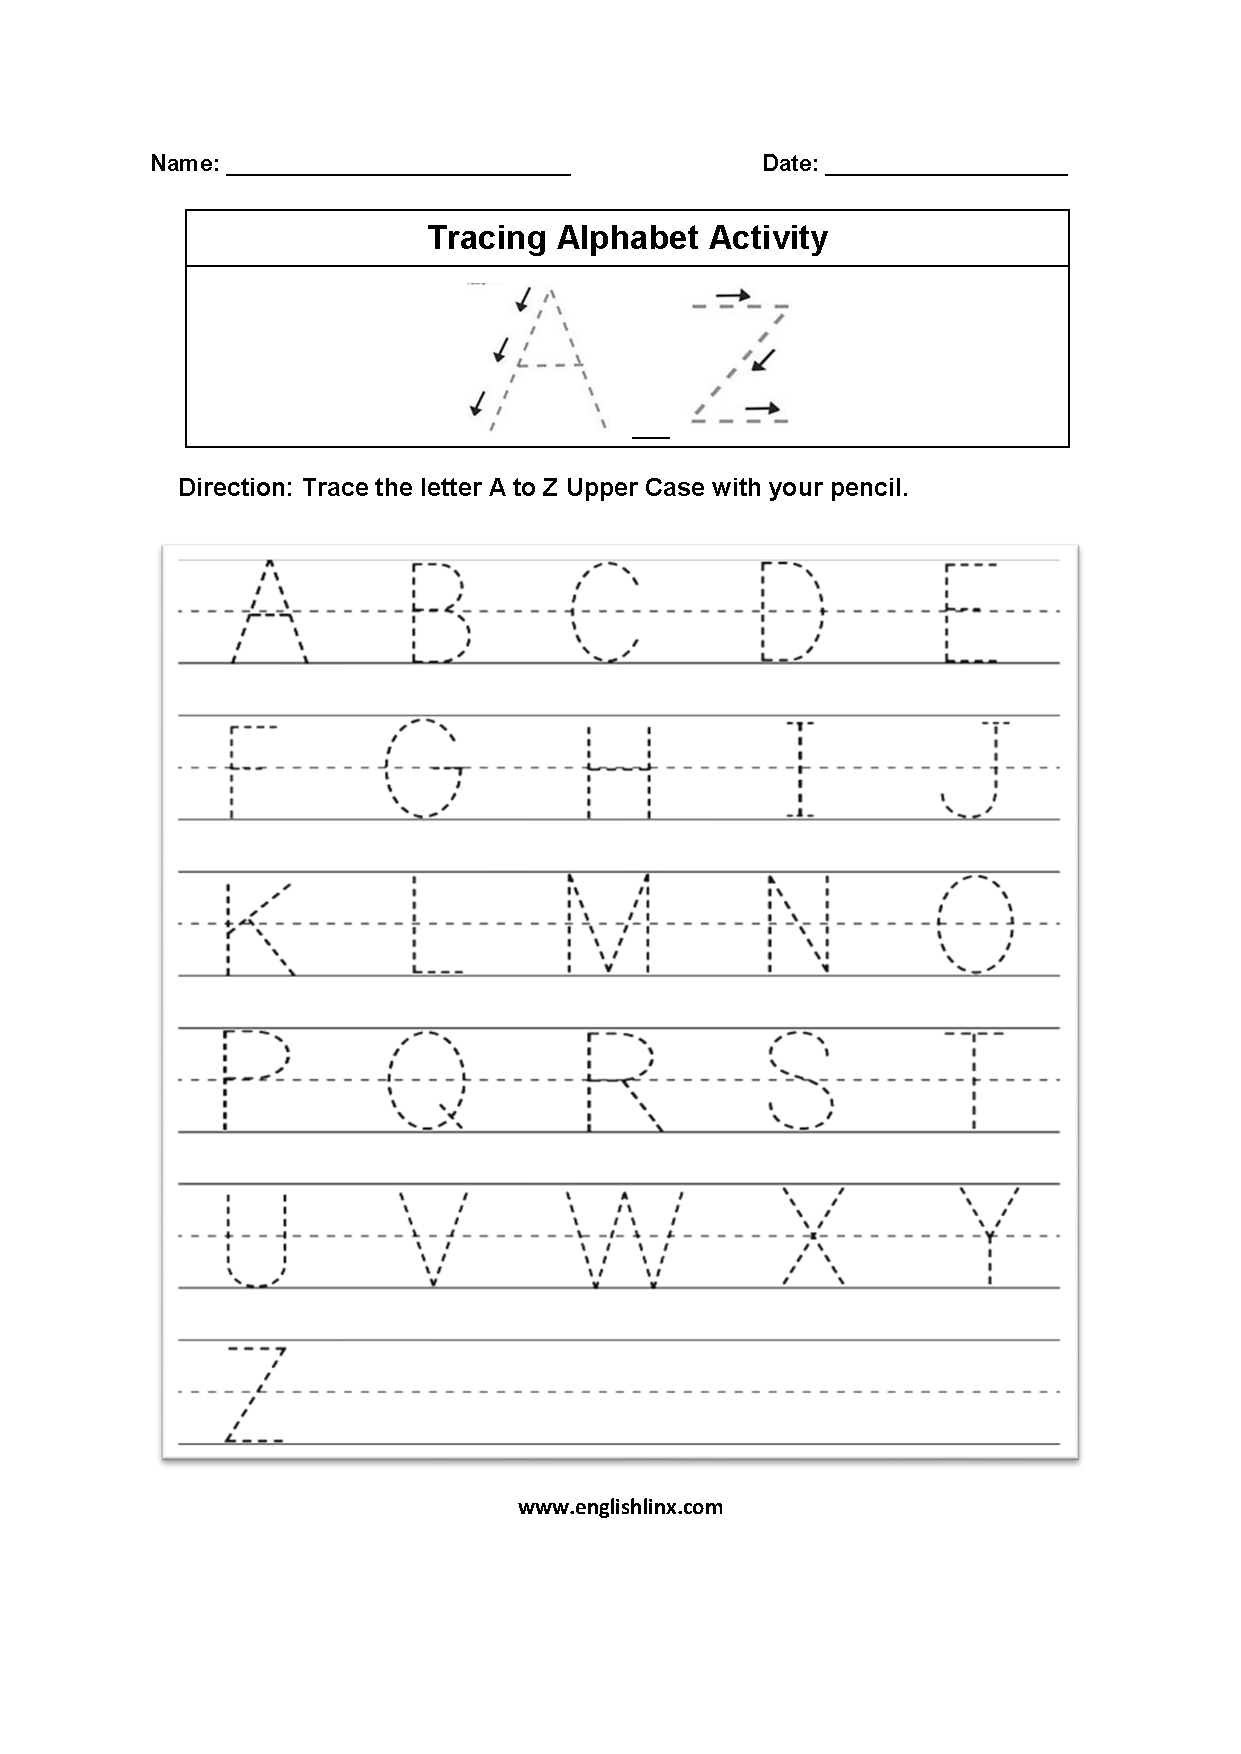 Worksheets : Practice Writing Alphabettters Worksheets To within Tracing Letters And Numbers Worksheets Pdf